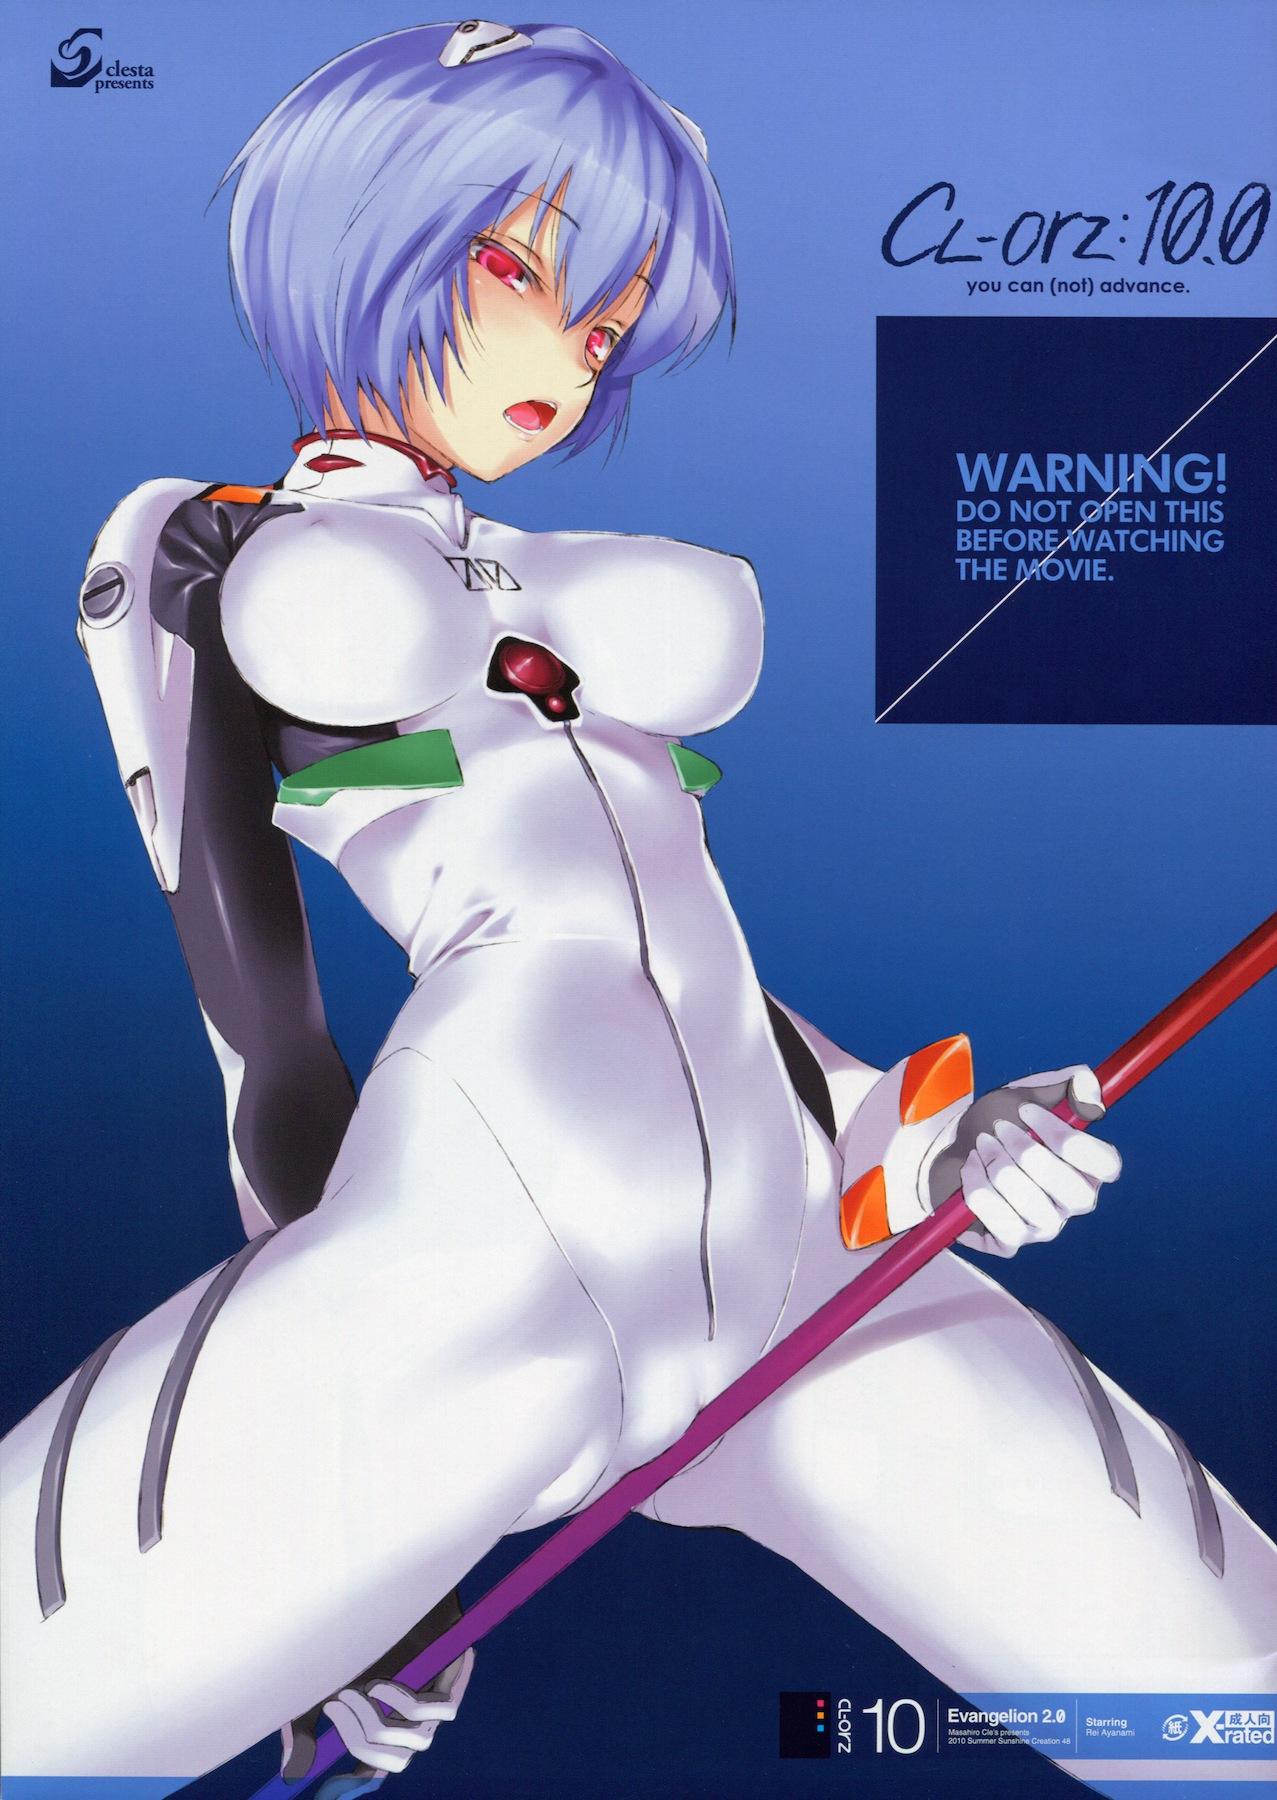 (SC48) [Clesta (Cle Masahiro)] CL-orz: 10.0 - you can (not) advance (Rebuild of Evangelion) 0